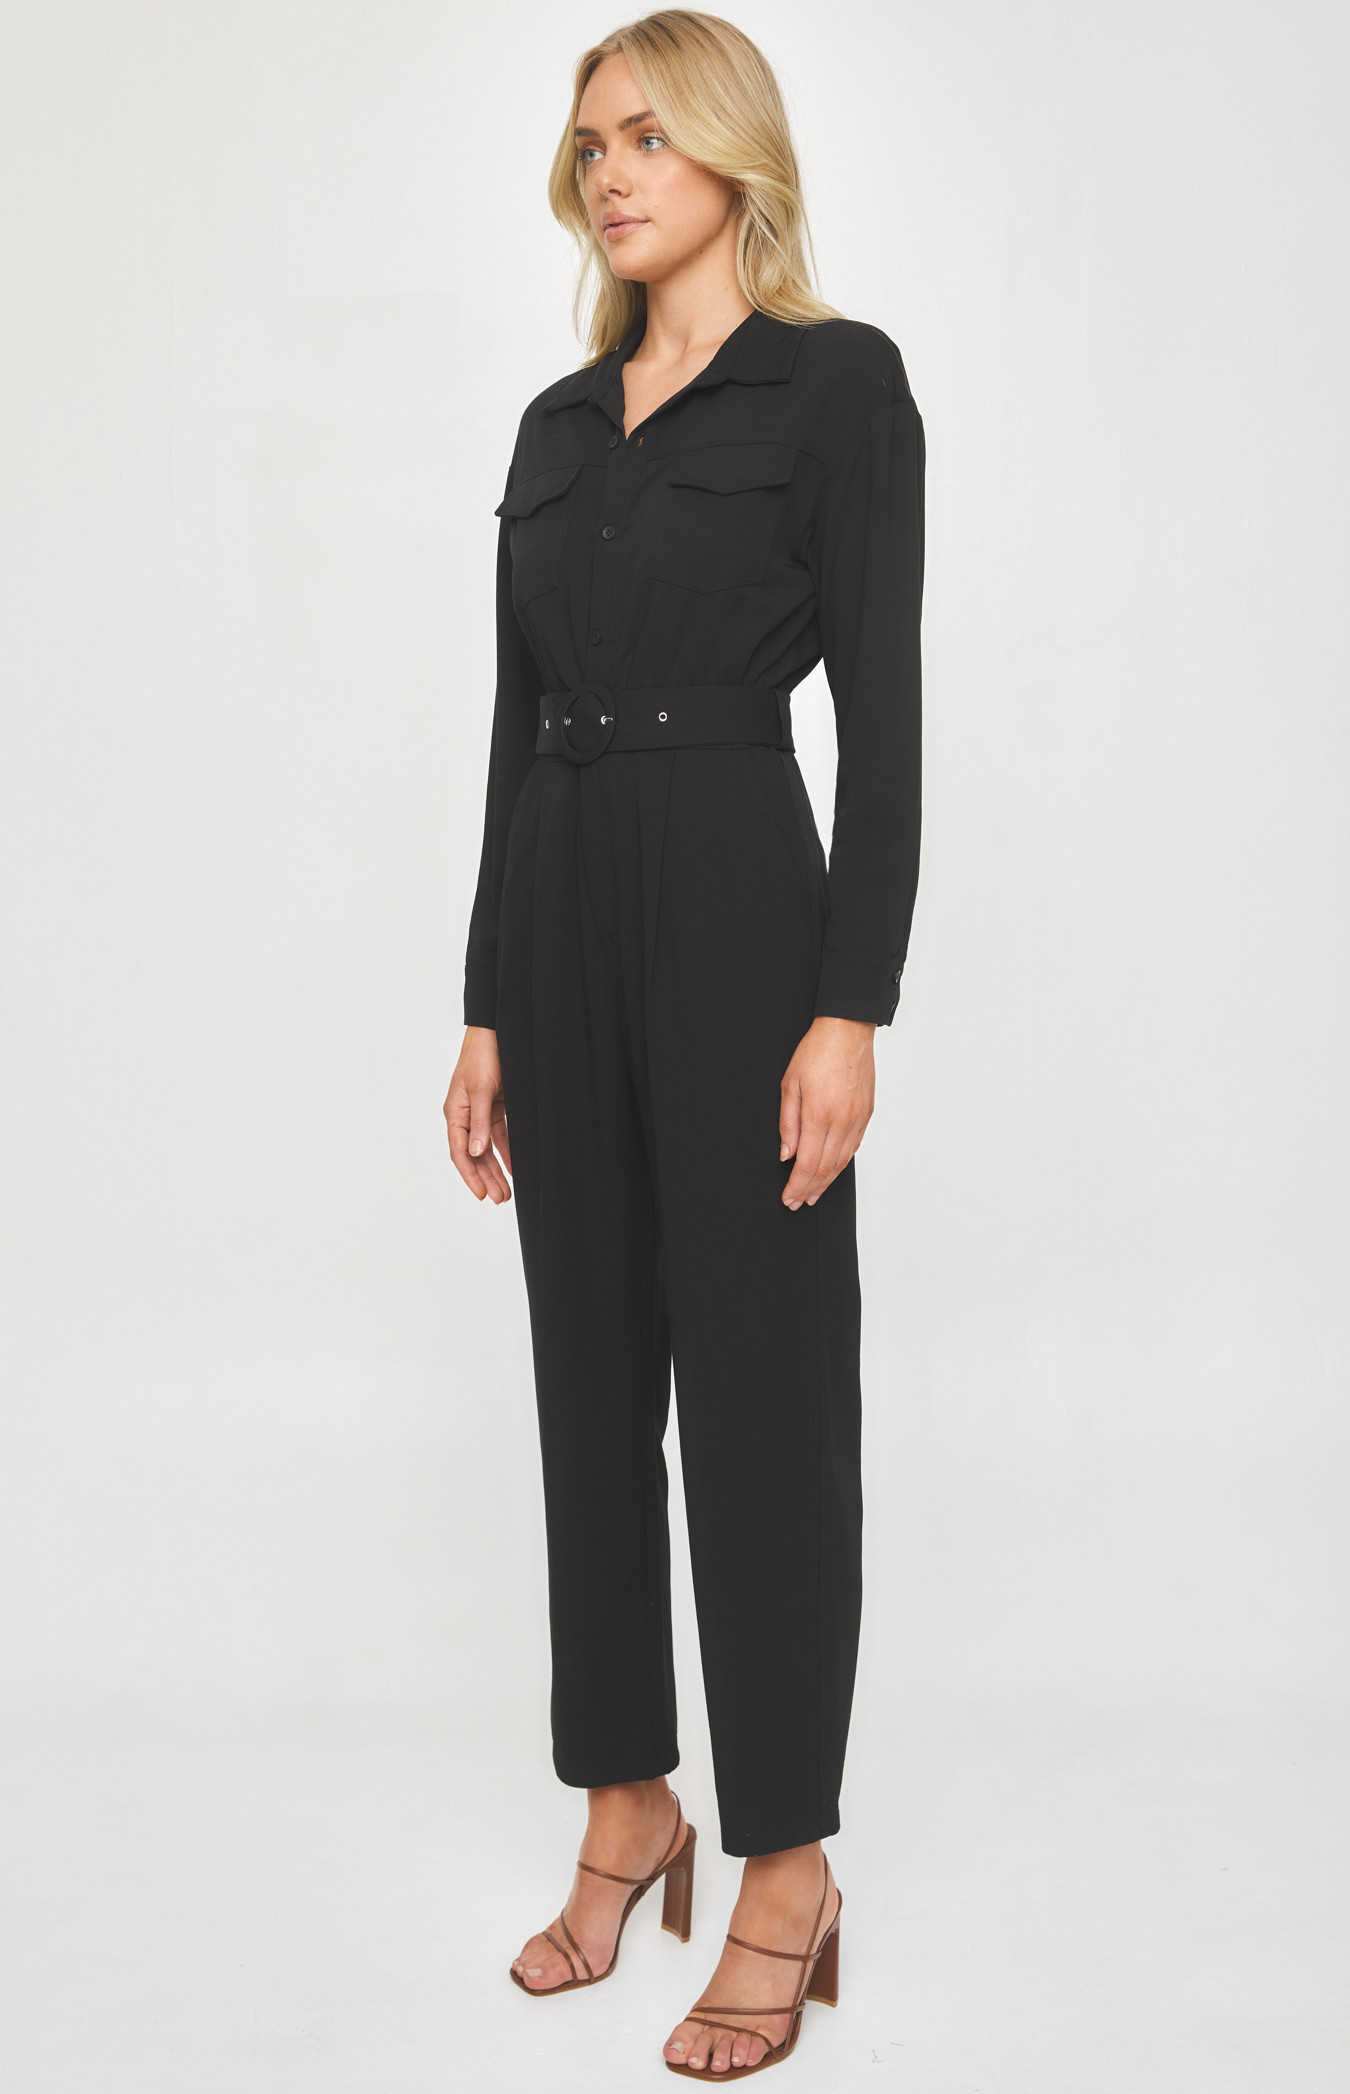 Utility Jumpsuit with Round Buckle and Front Pockets (SJP528A)